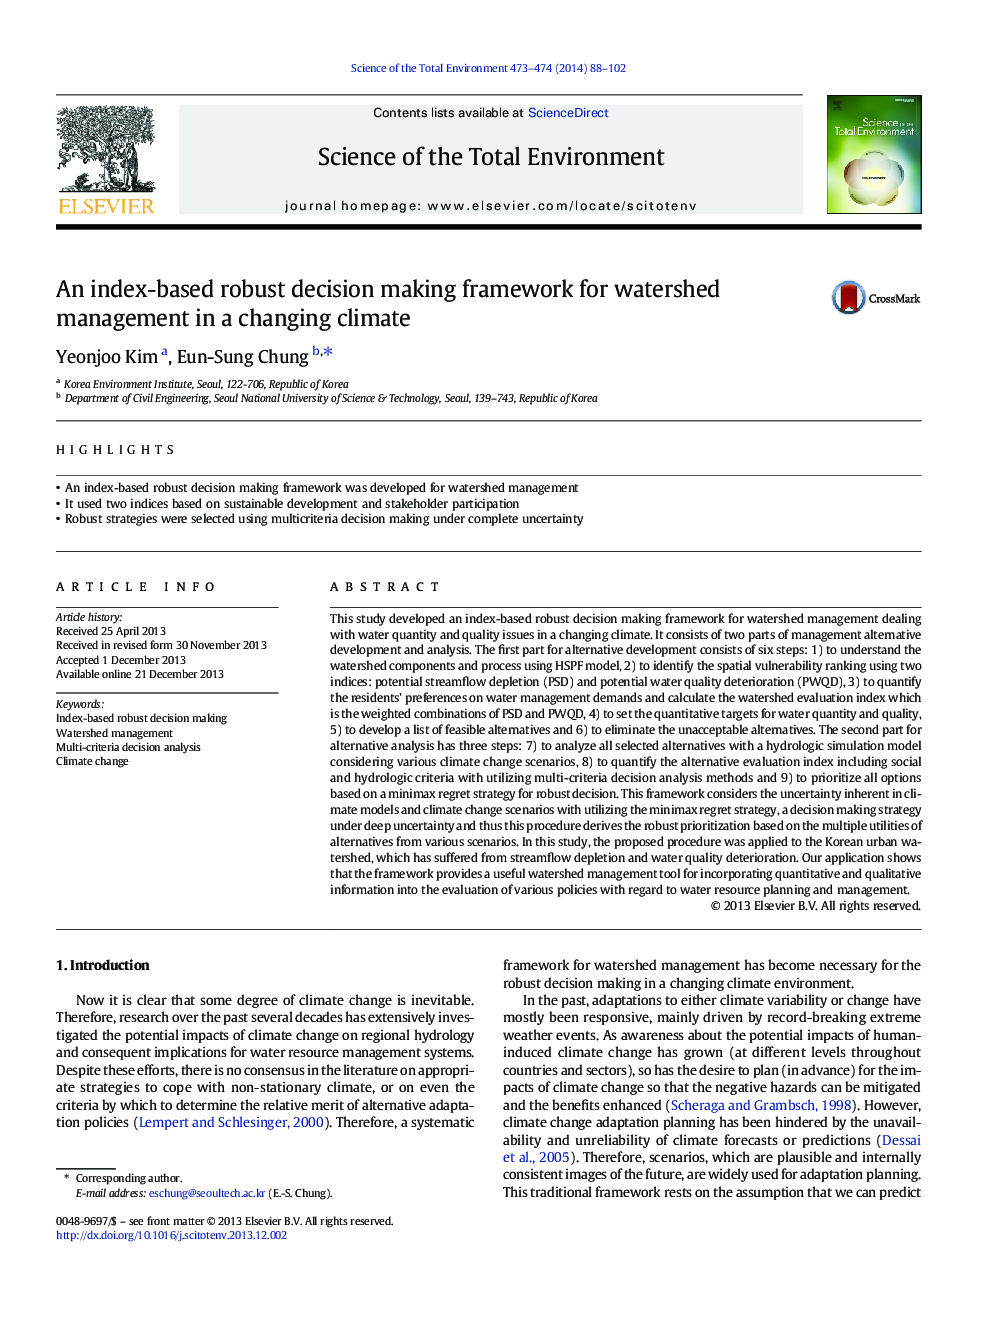 An index-based robust decision making framework for watershed management in a changing climate